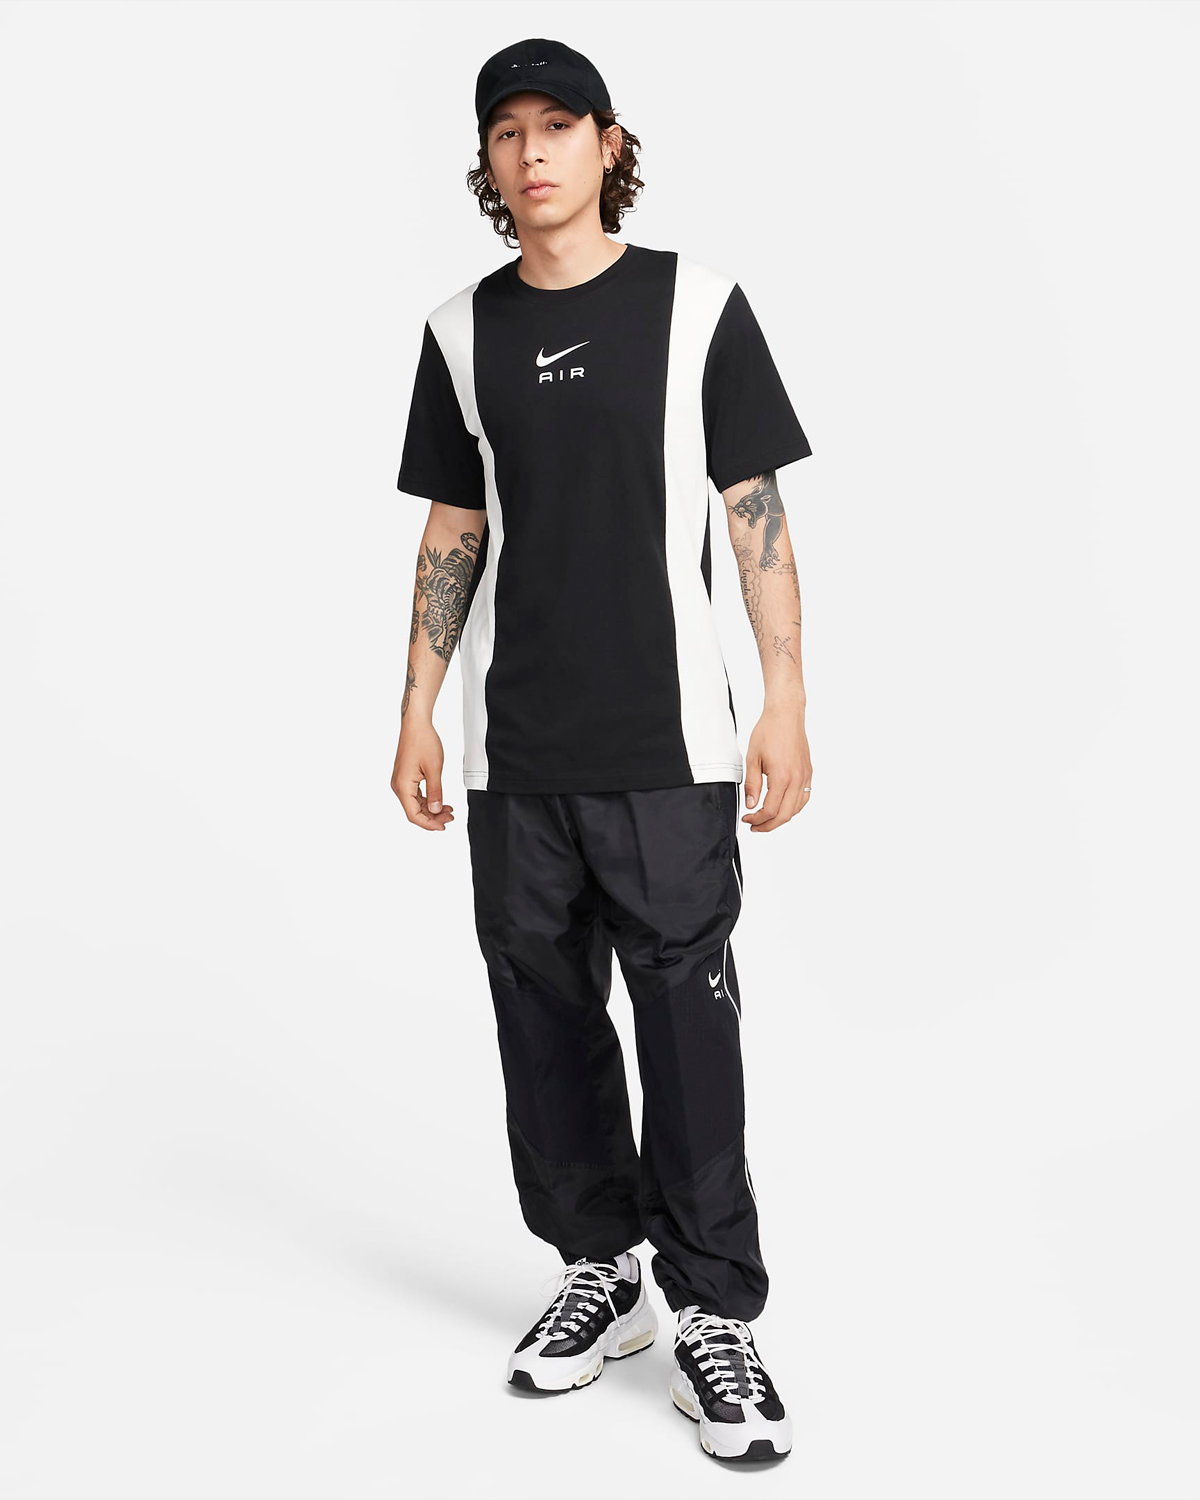 Nike-Air-Woven-Pants-Black-White-Outfit